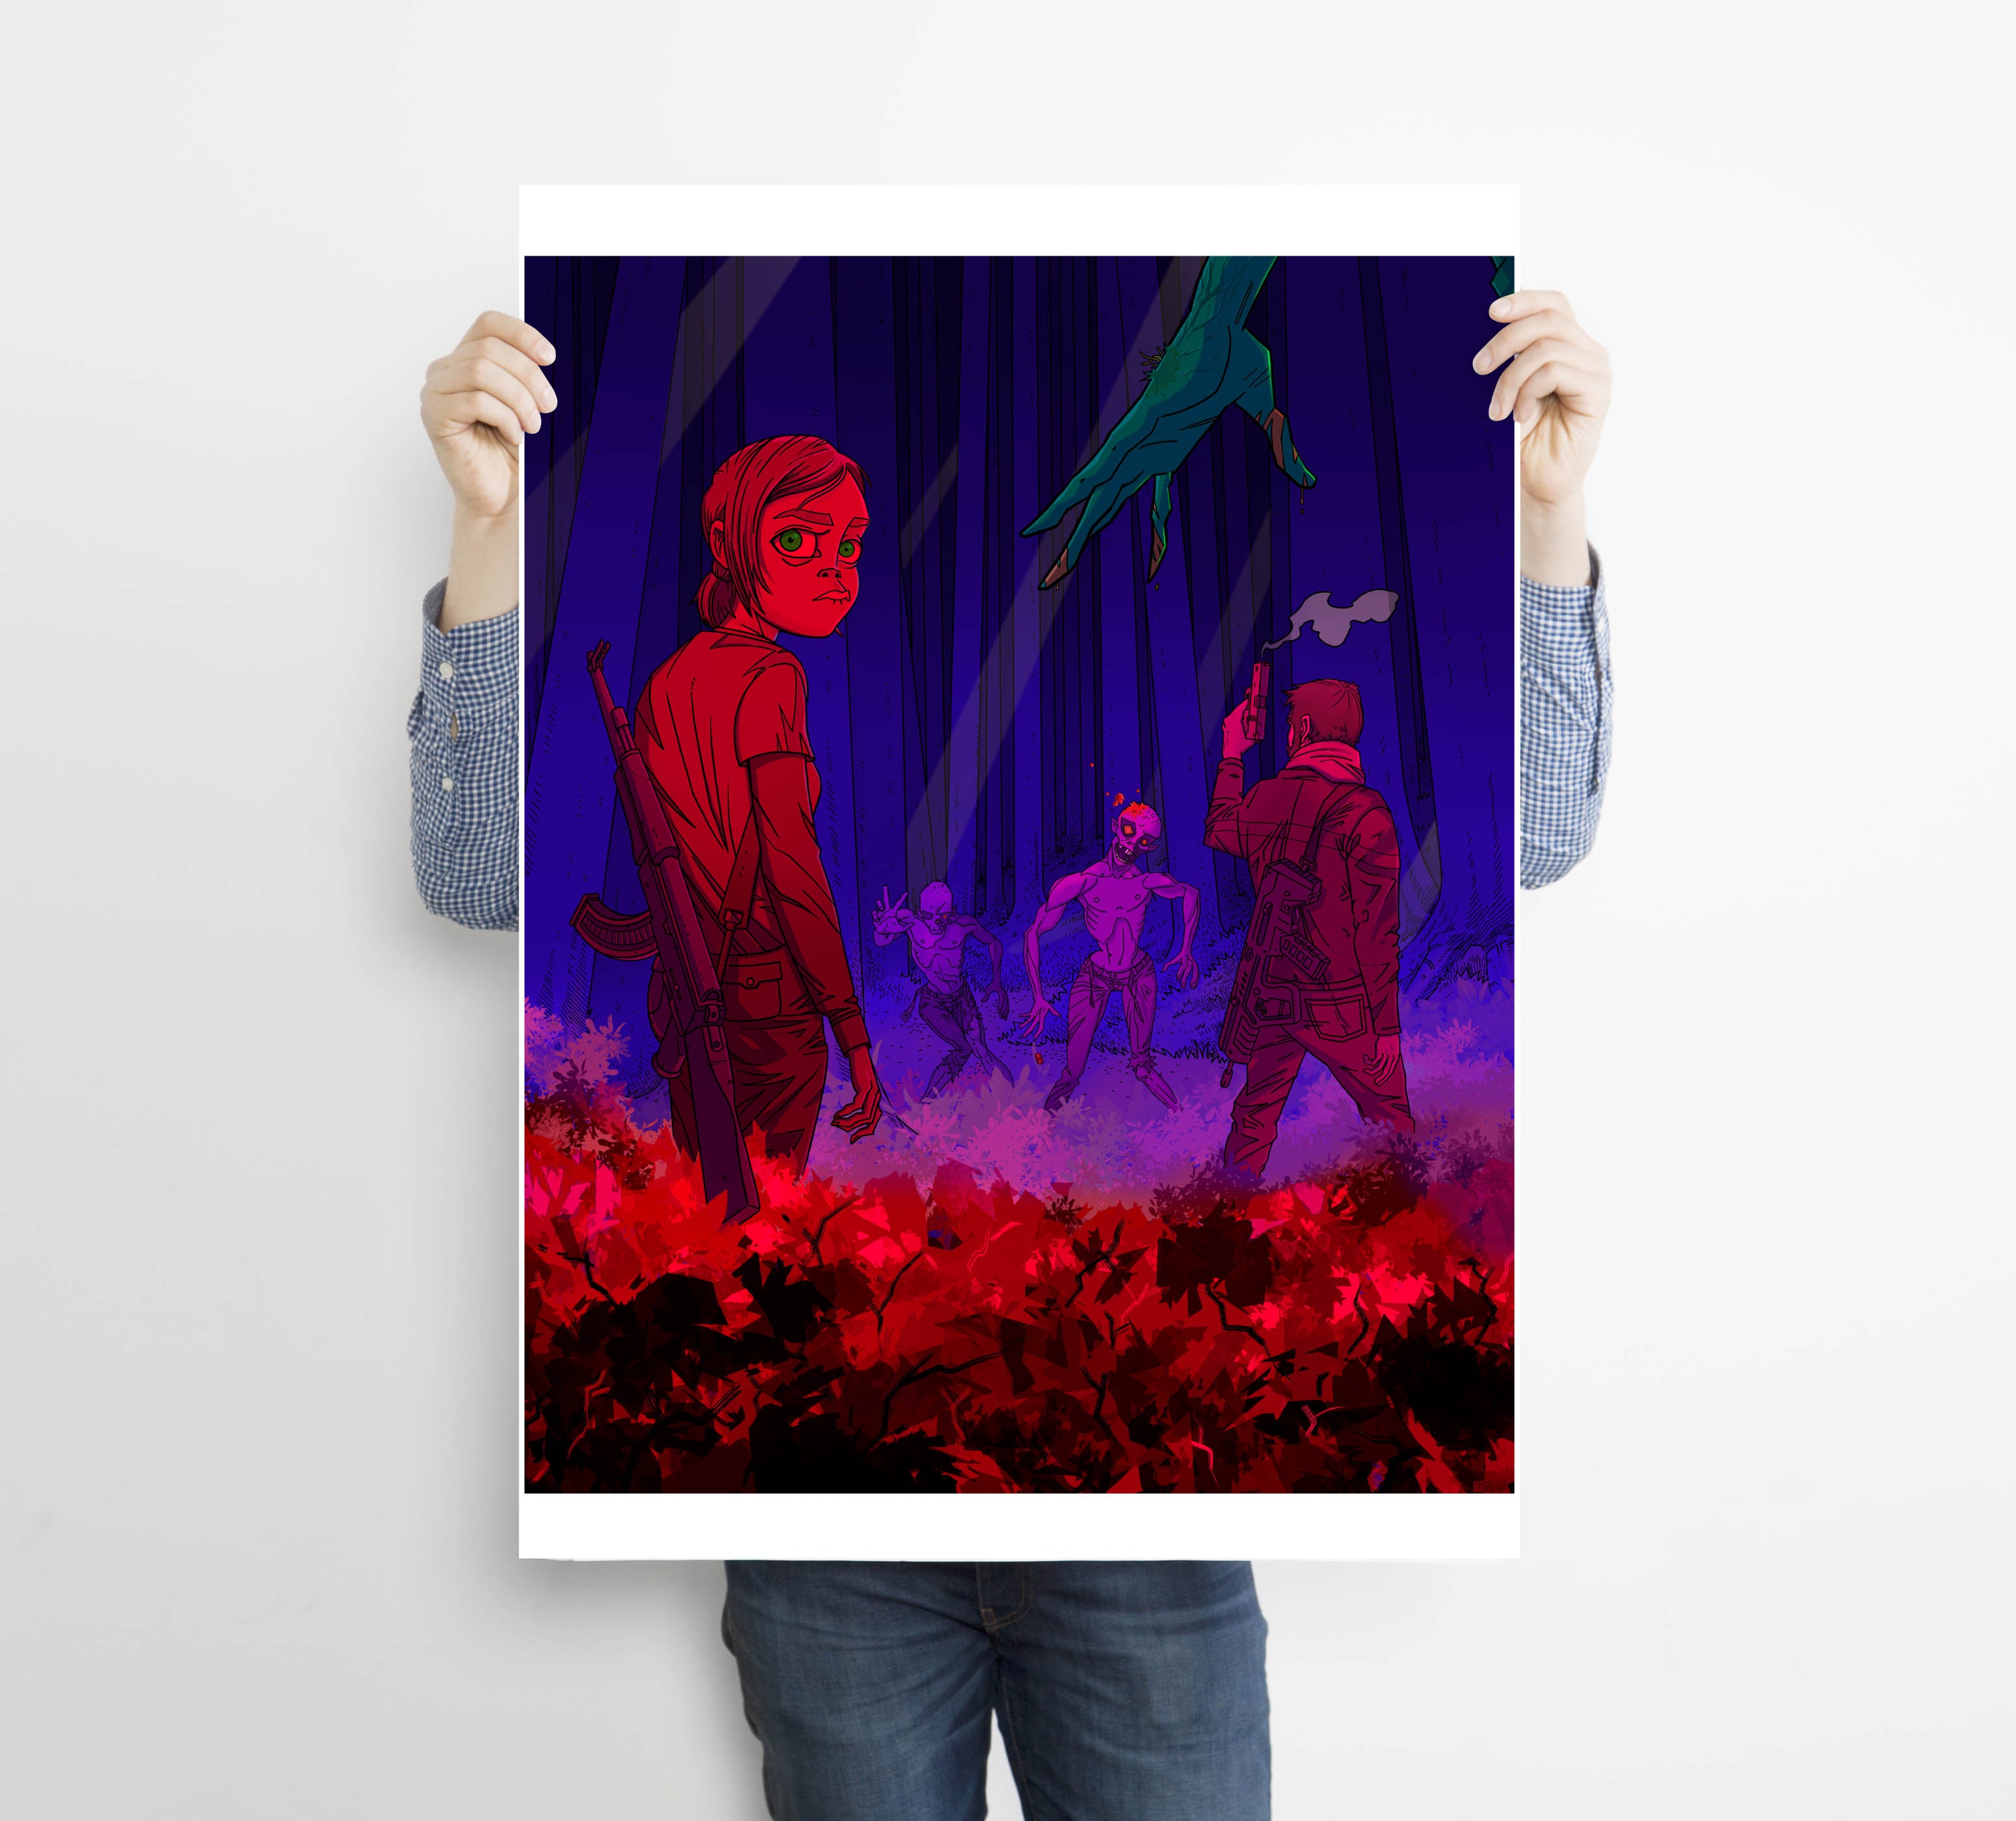 Unique and cool Gorillaz-style zombie game poster/wall art illustration